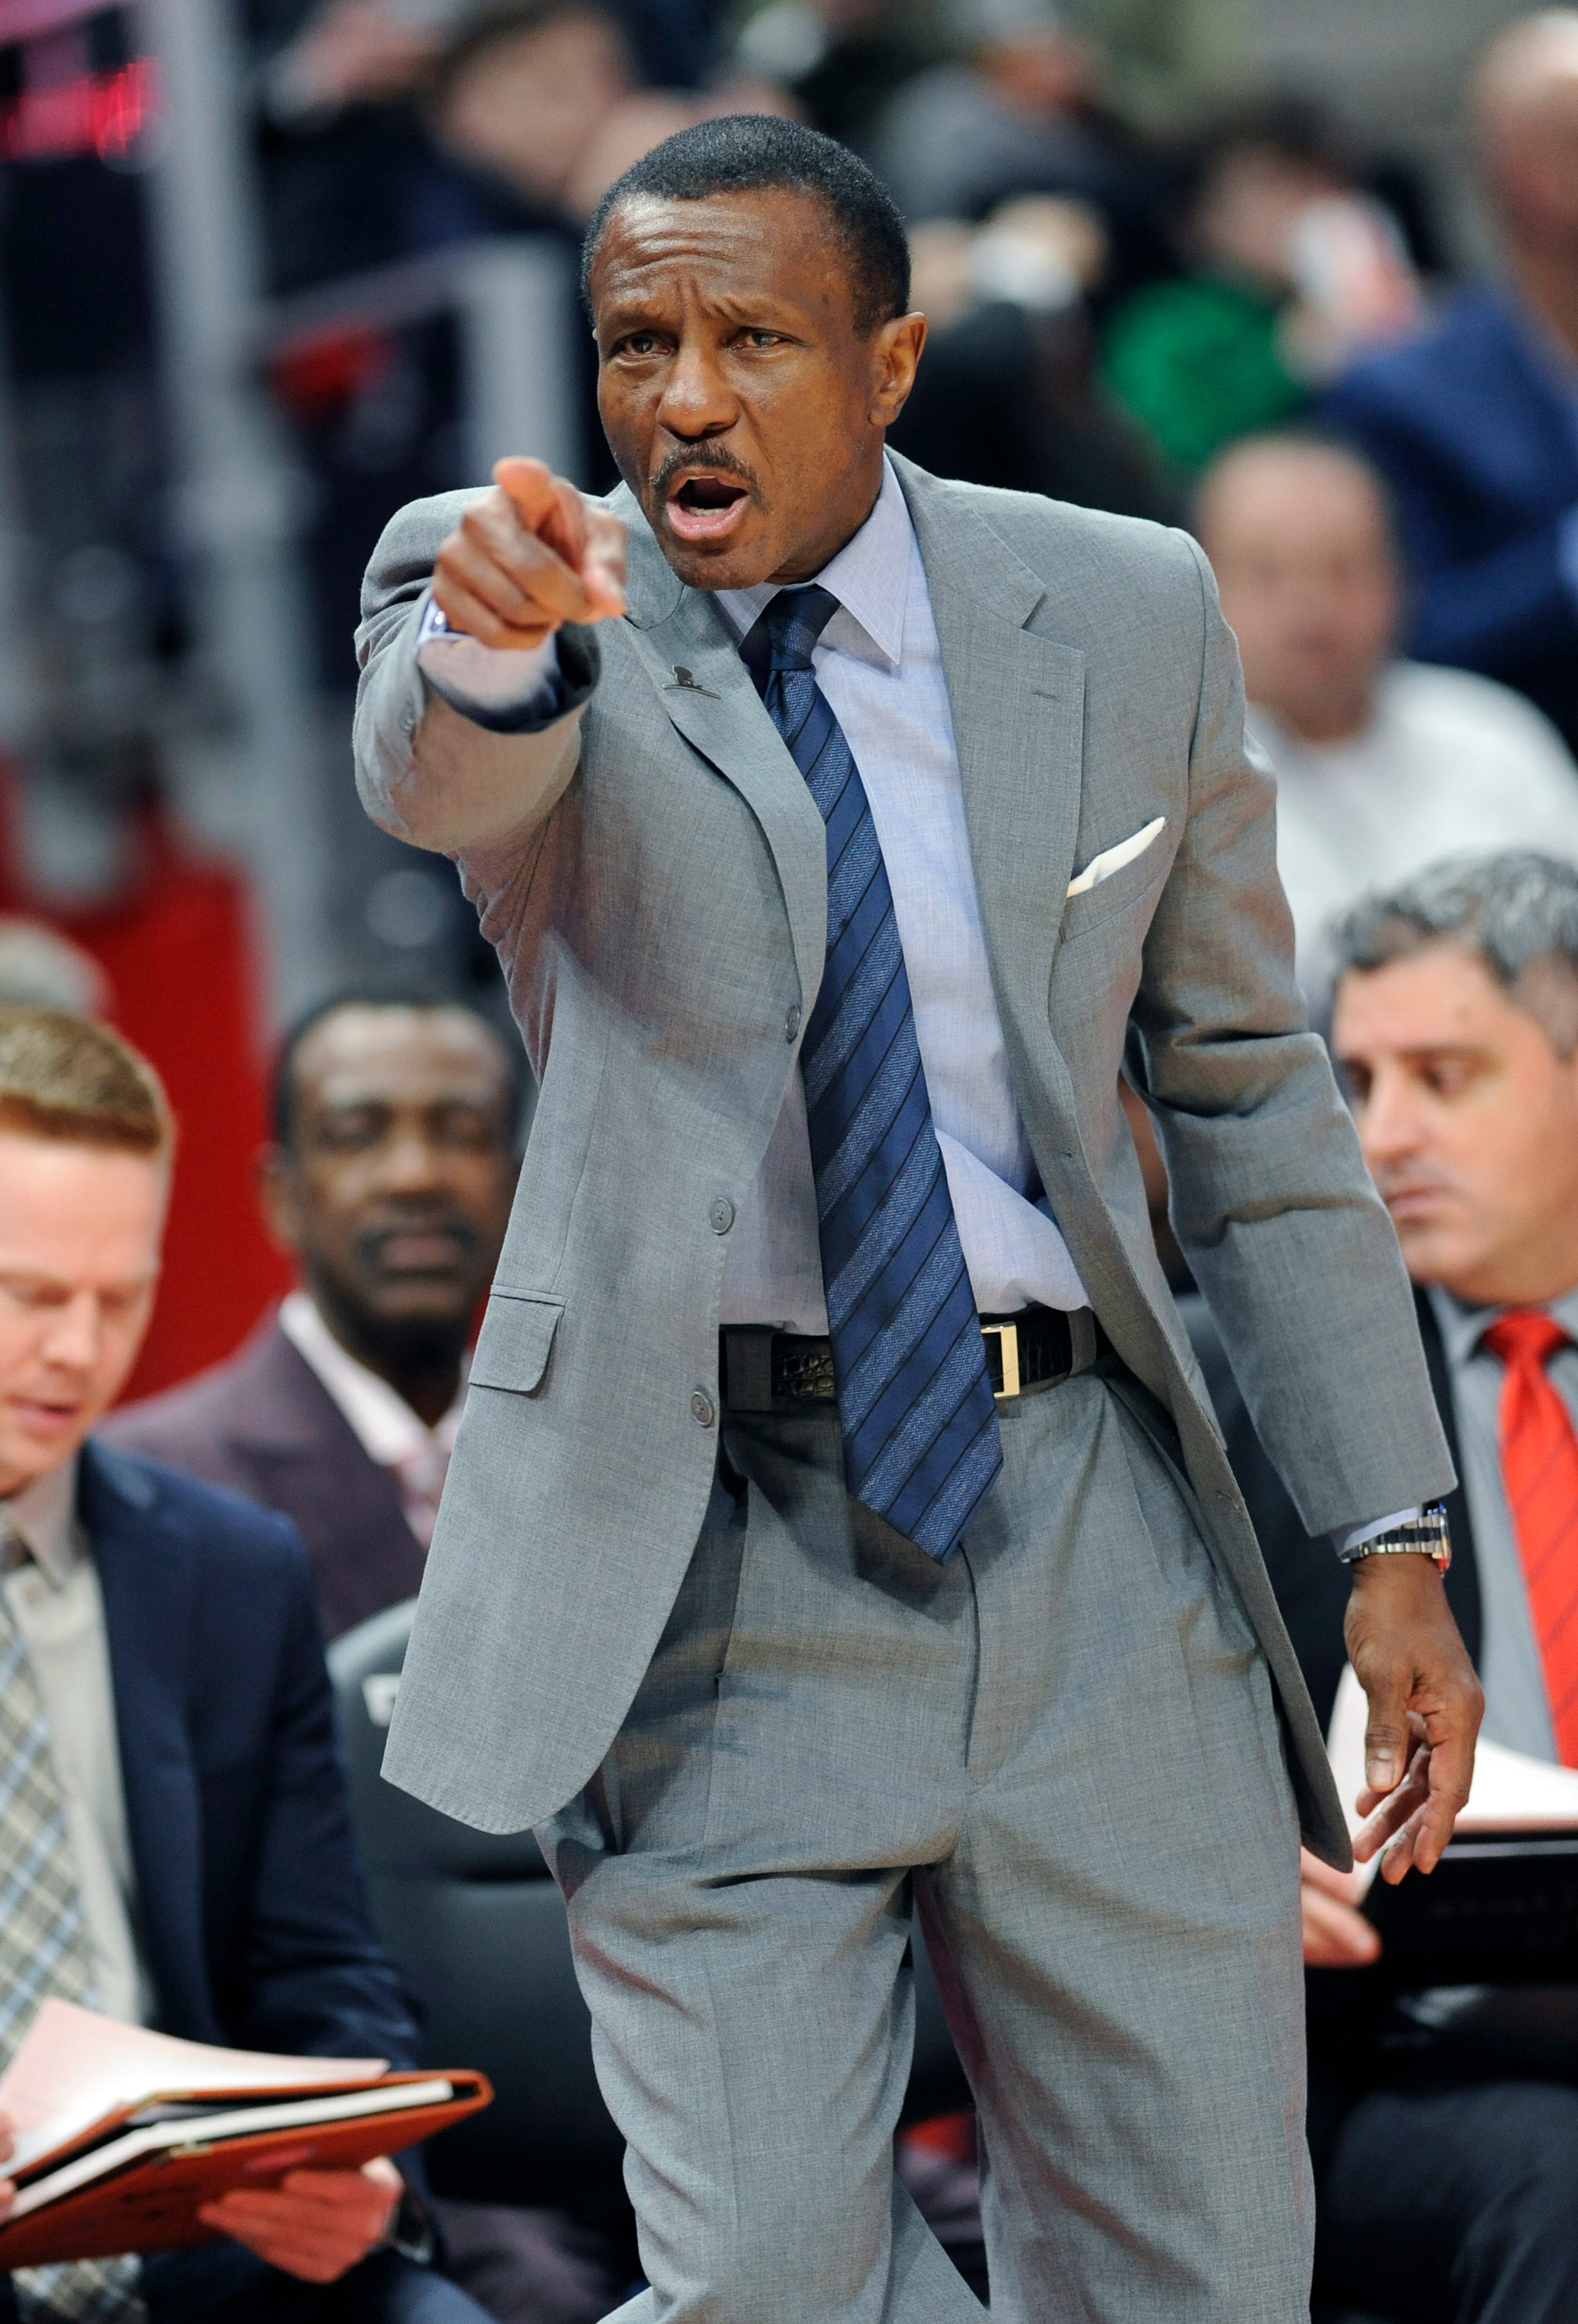 Pistons coach Dwane Casey argues a call in the second quarter.